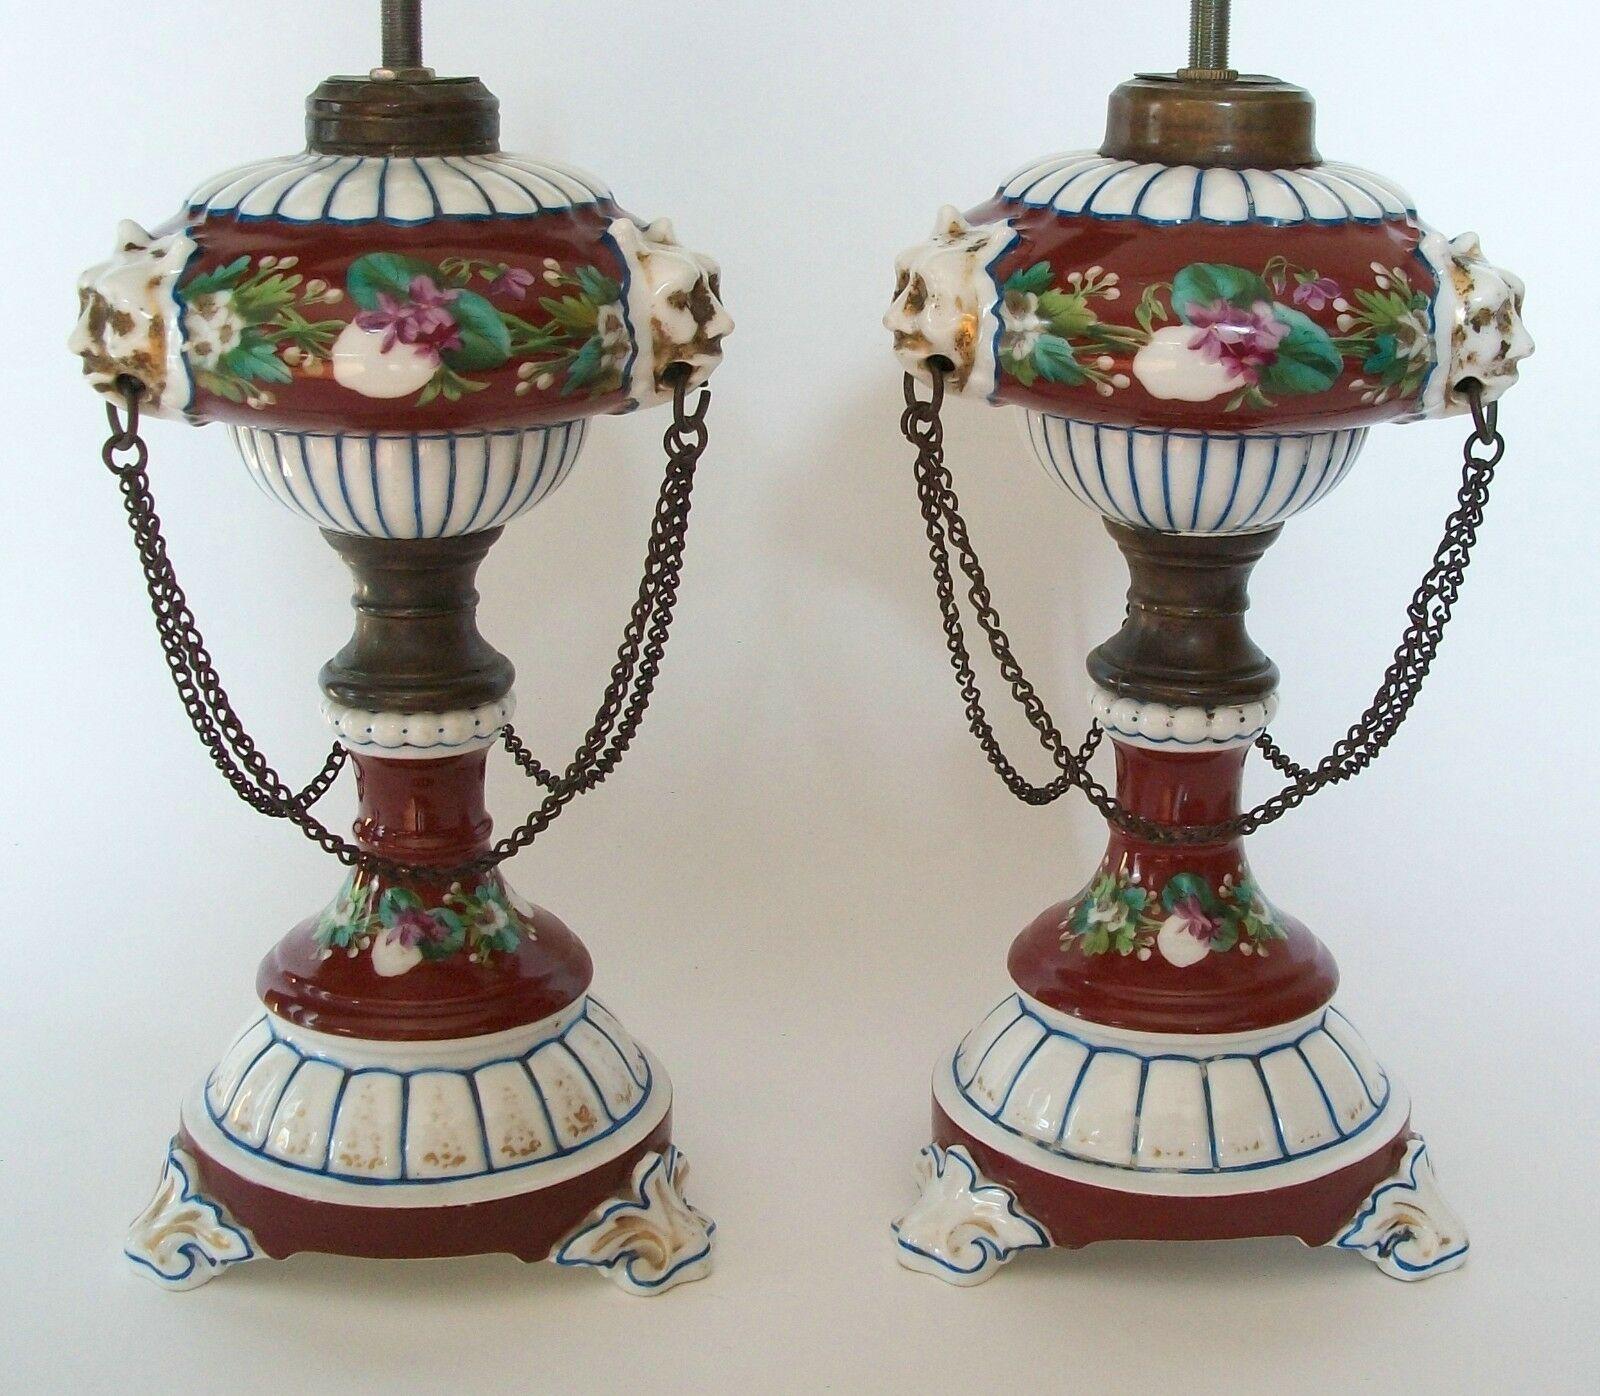 Fine pair of Victorian hand painted and gilded ceramic oil lamps - each featuring upper and lower floral bands - the top band separated by three gilded lion head masks with original bronze rings and chain swags - set against a sold burgundy